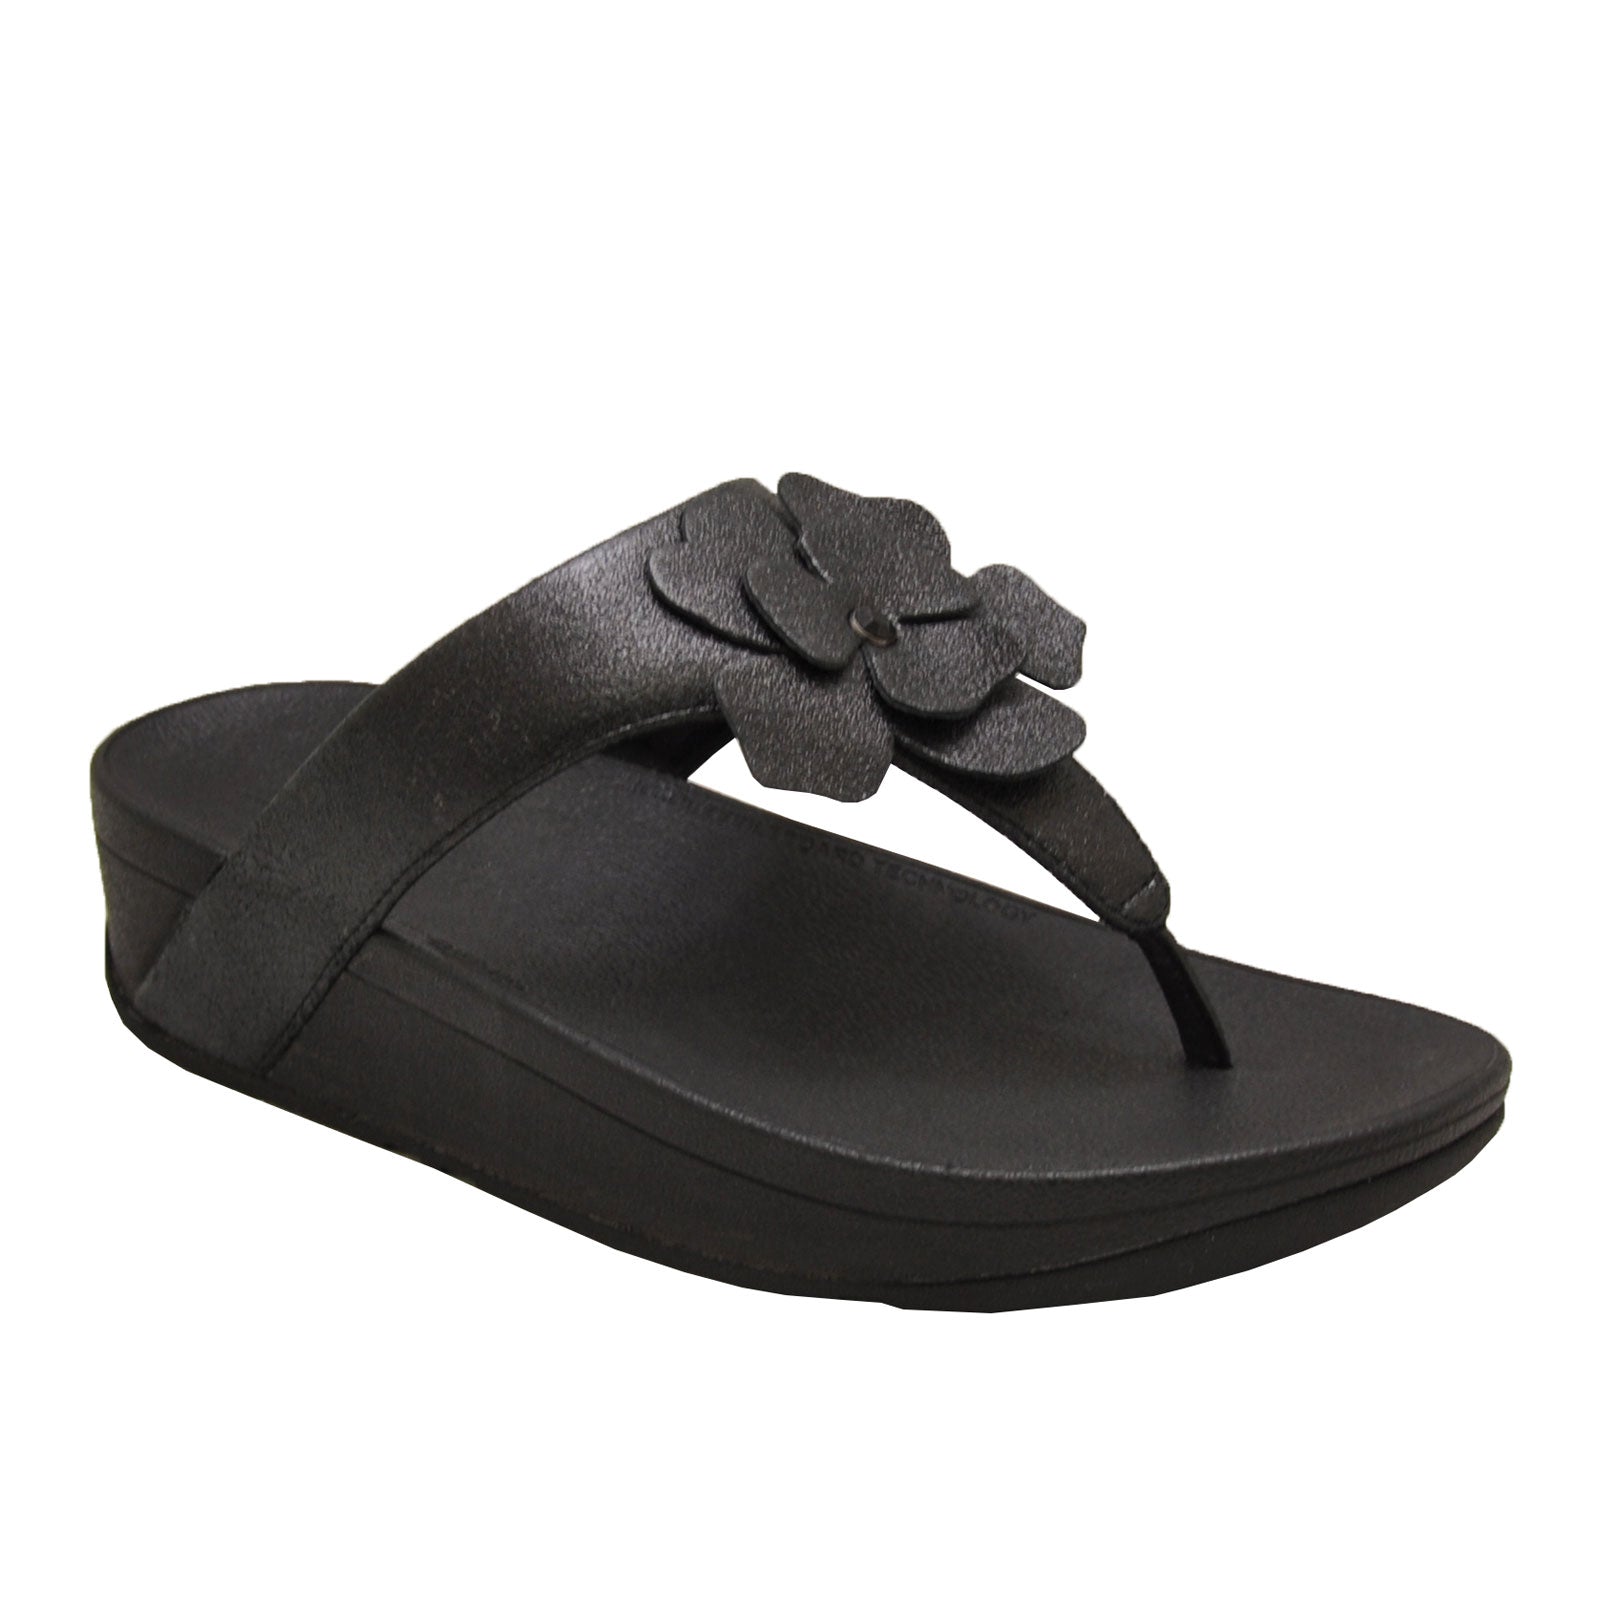 FitFlop Lottie Corsage Toe-Thong